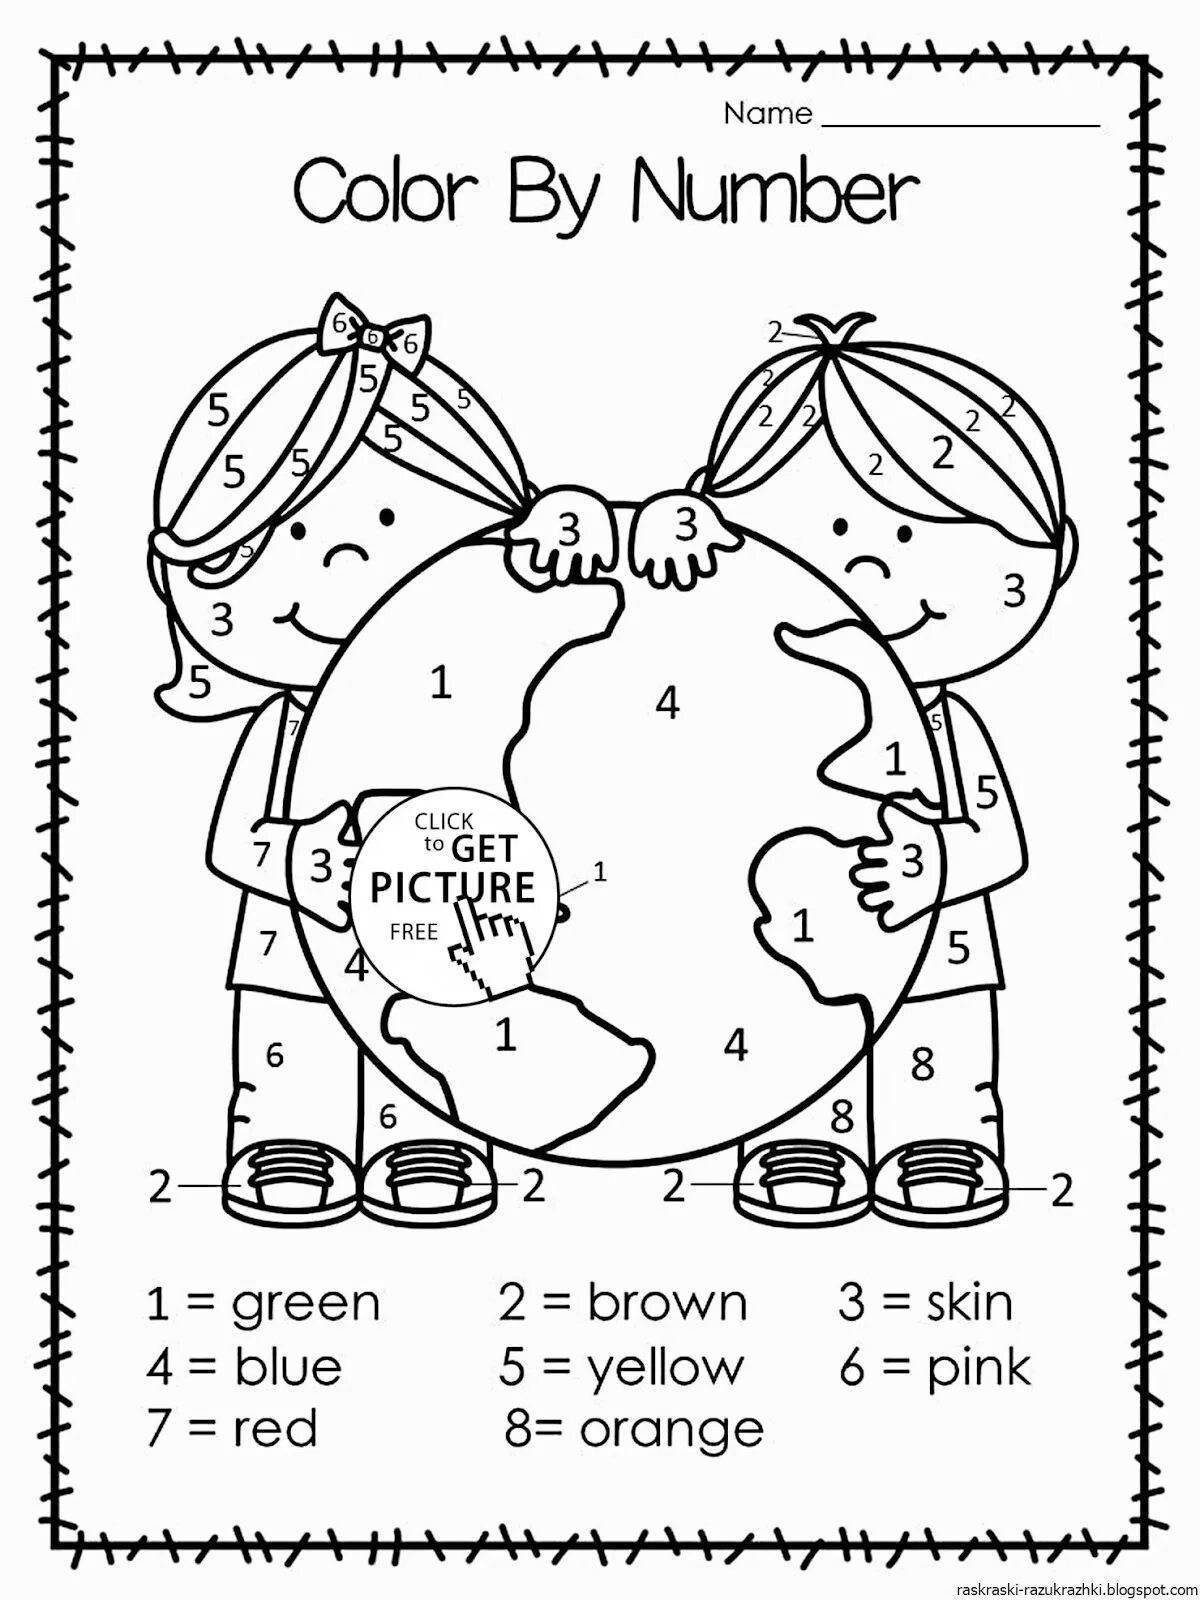 Innovative English coloring book for 2nd grade